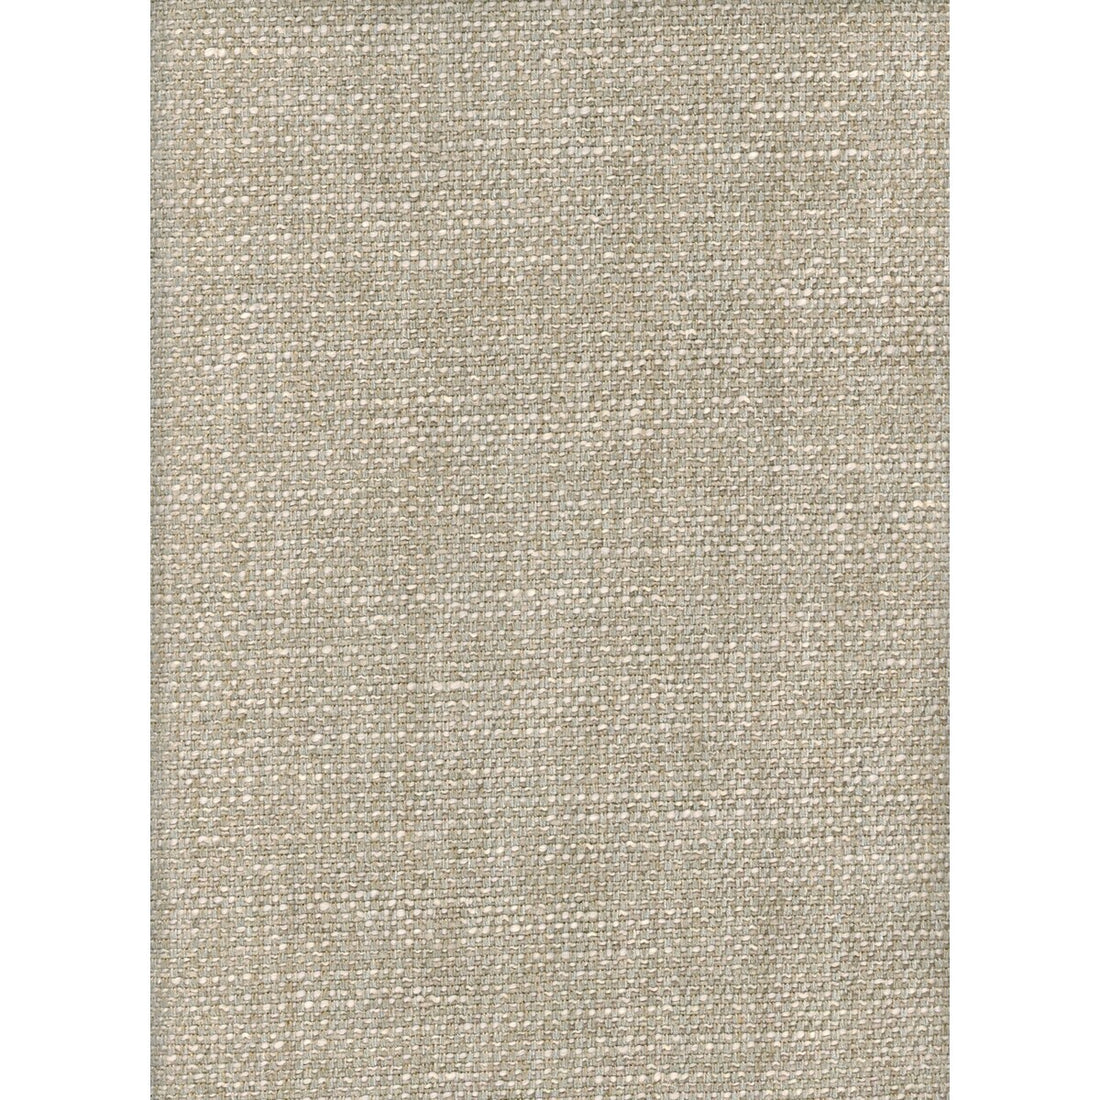 Paraggi fabric in linen color - pattern AM100299.11.0 - by Kravet Couture in the Andrew Martin Portofino collection